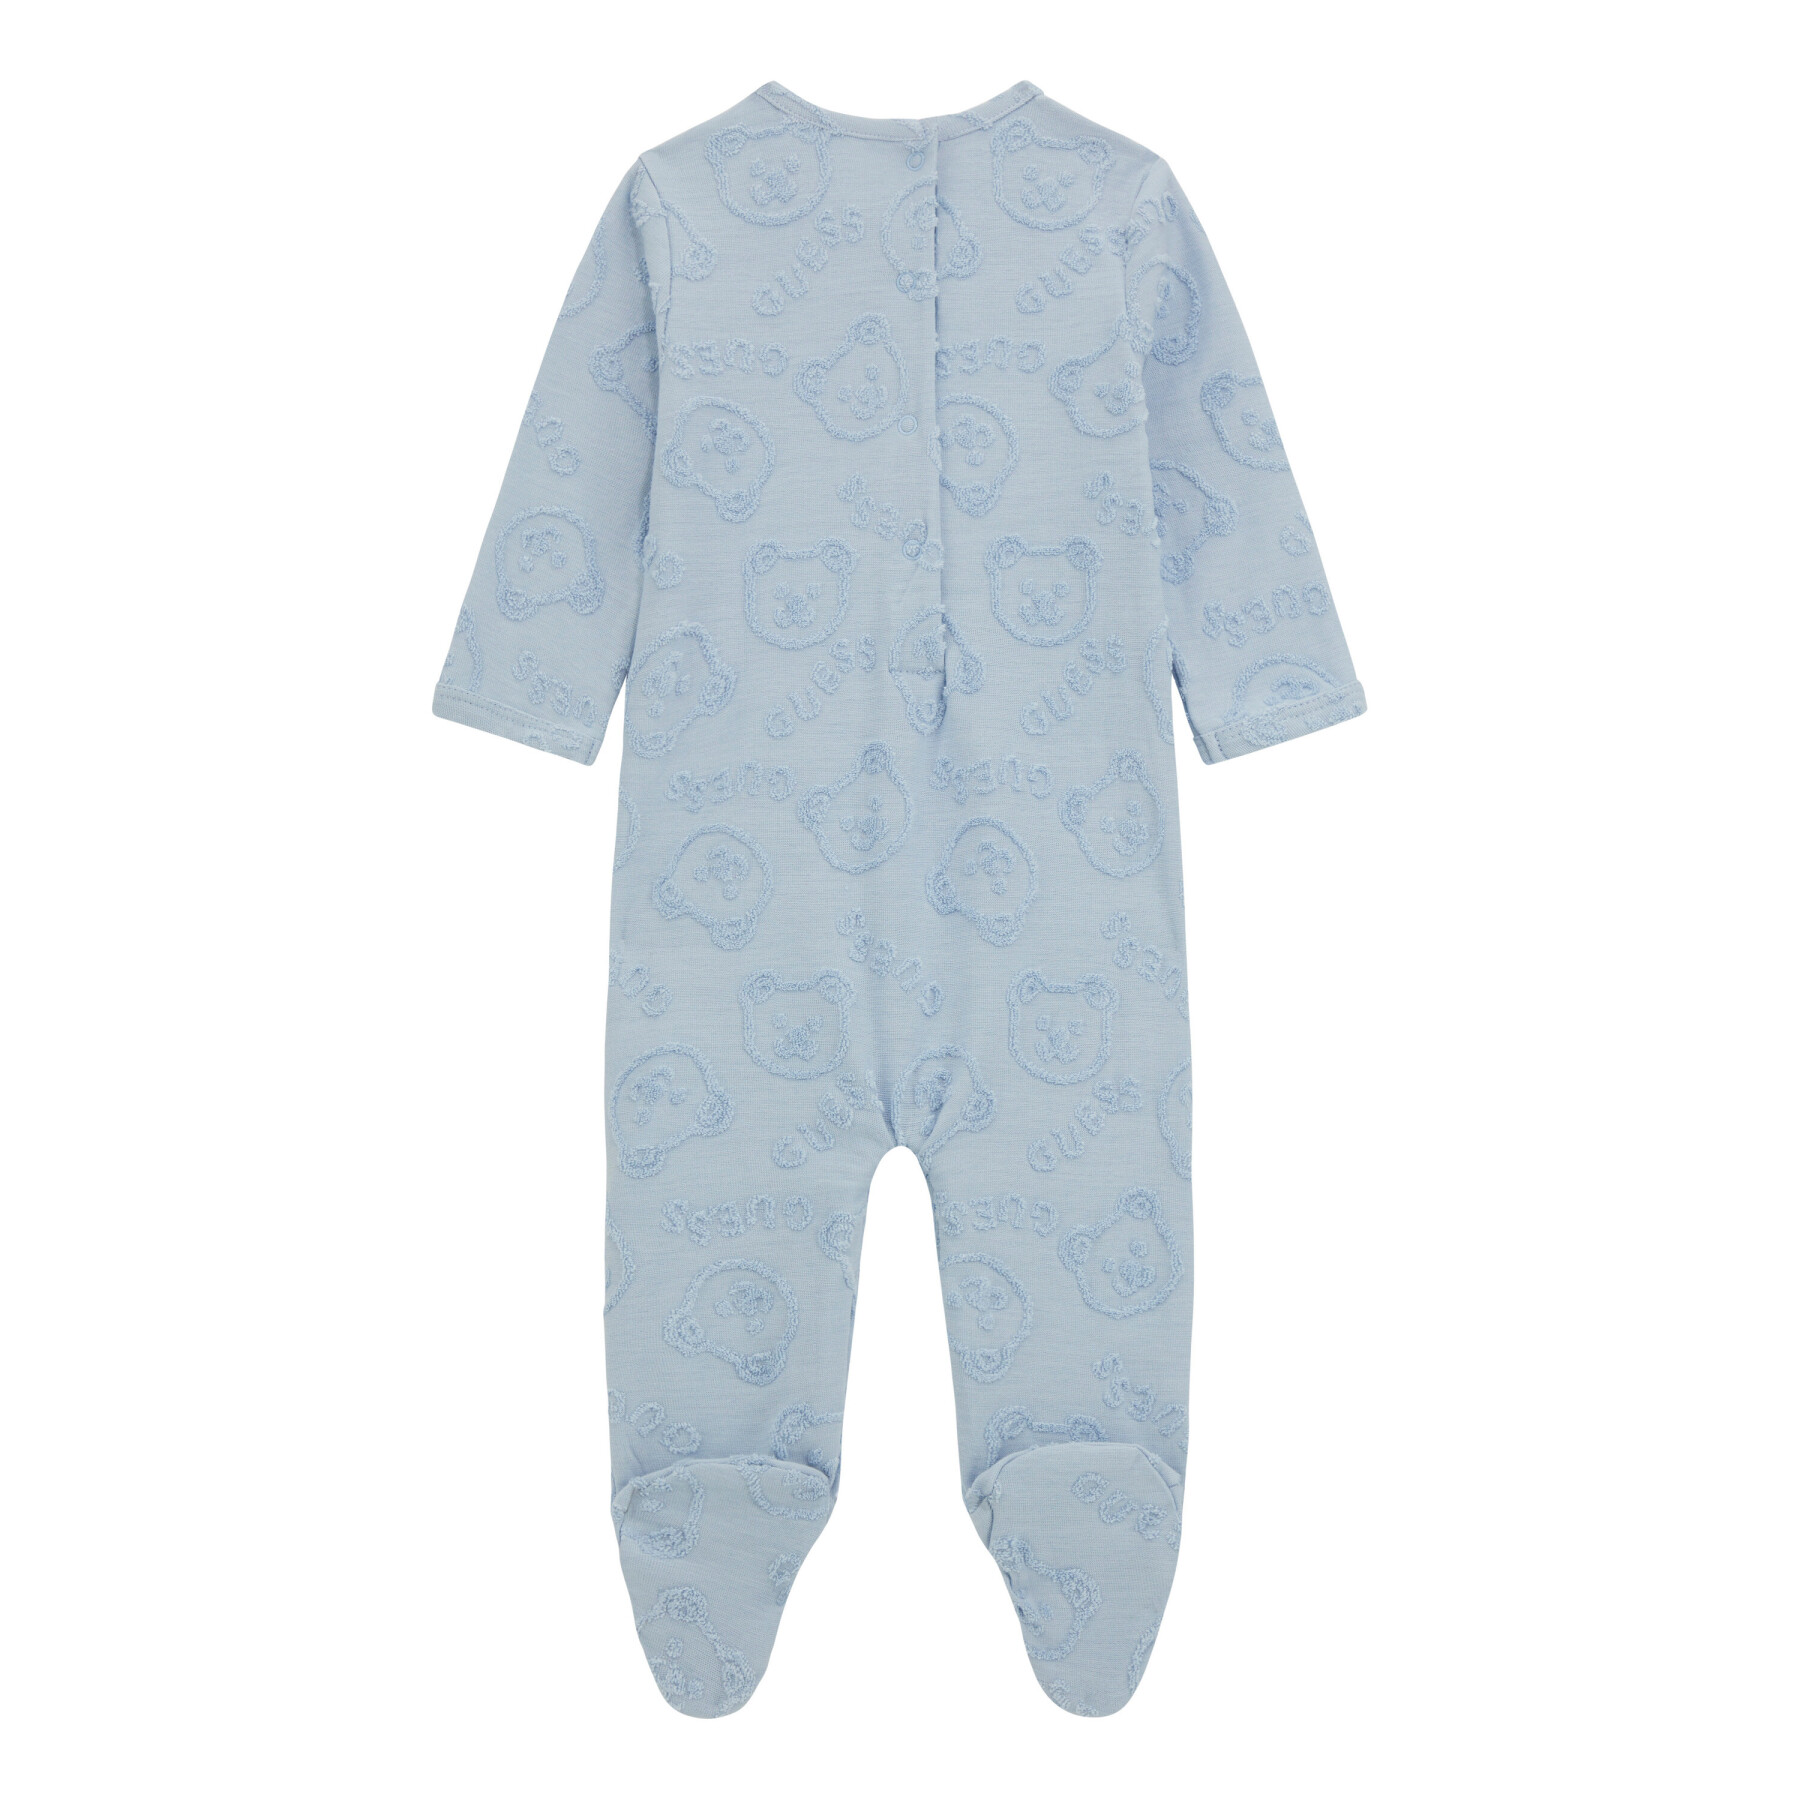 Baby overalls Guess Jacquard